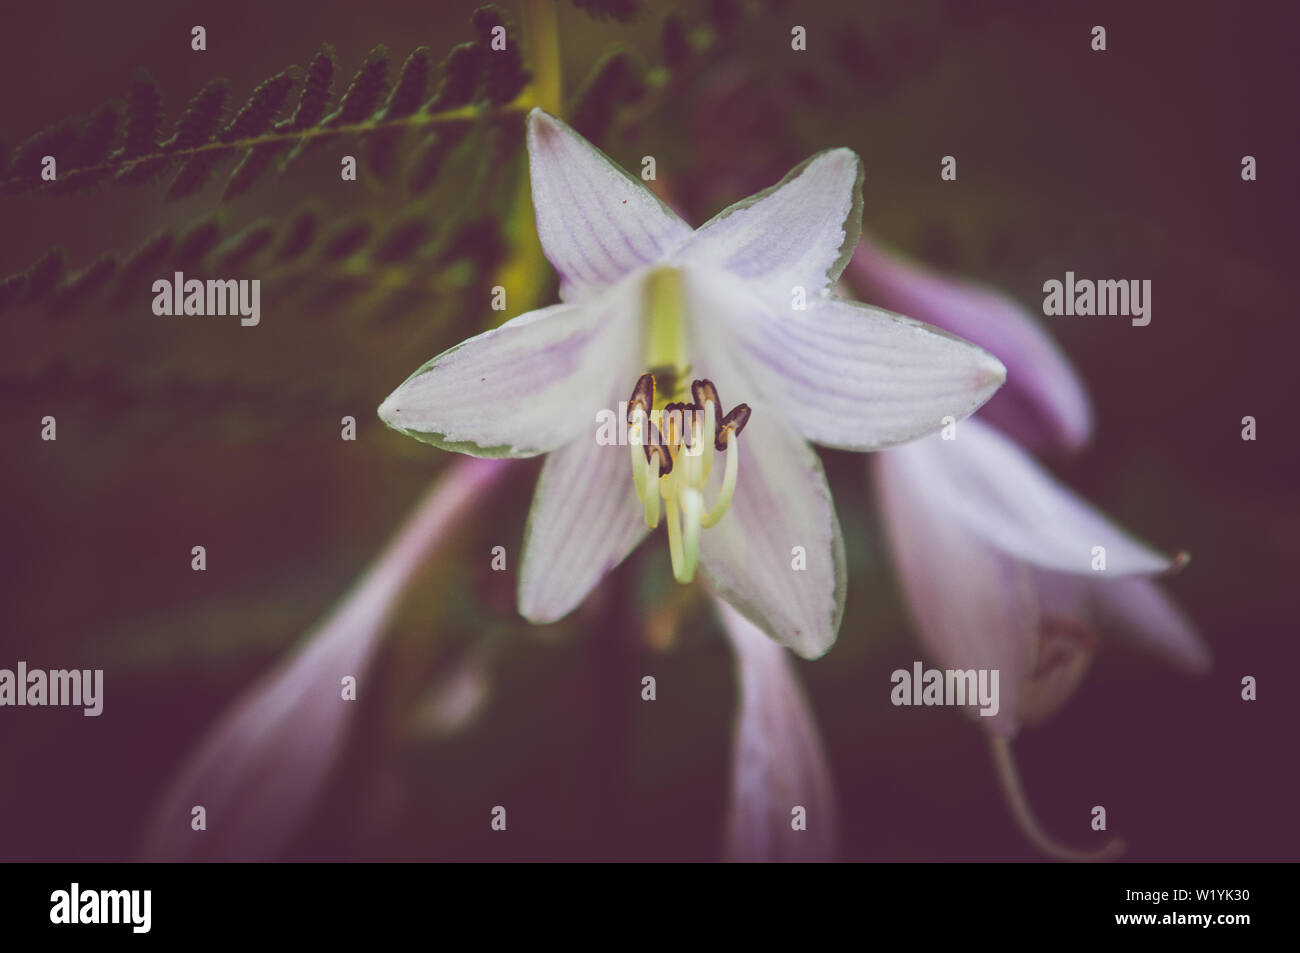 An artistic image of a Lilium flower in bloom with a little bug inside the petals. Stock Photo